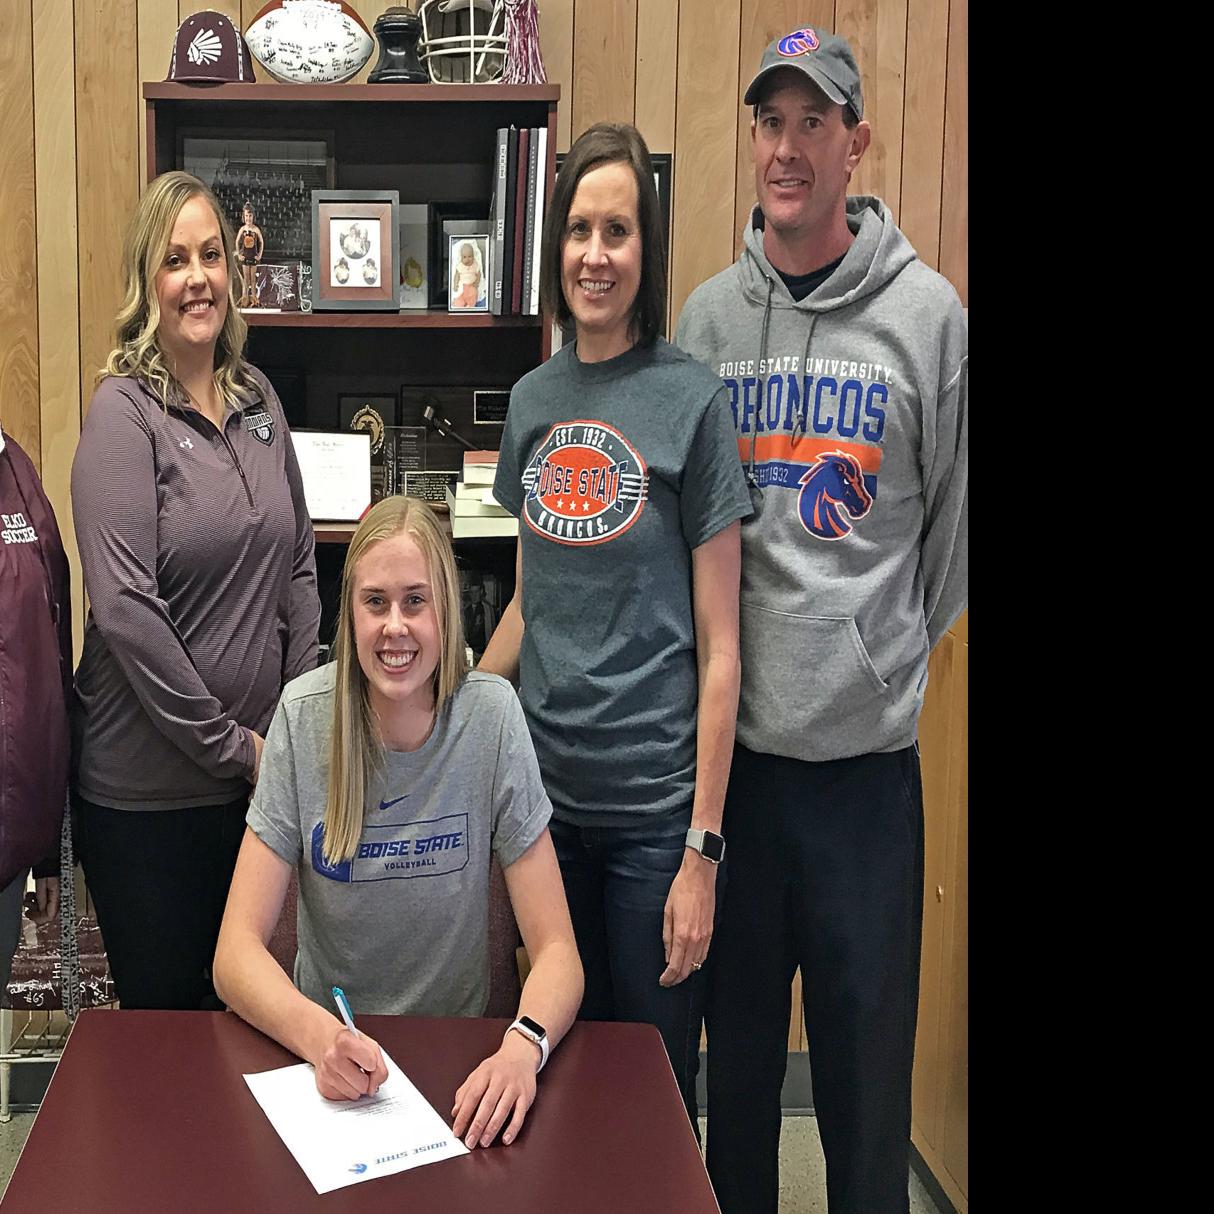 Howe Will Set Shots At Boise State University Local Sports